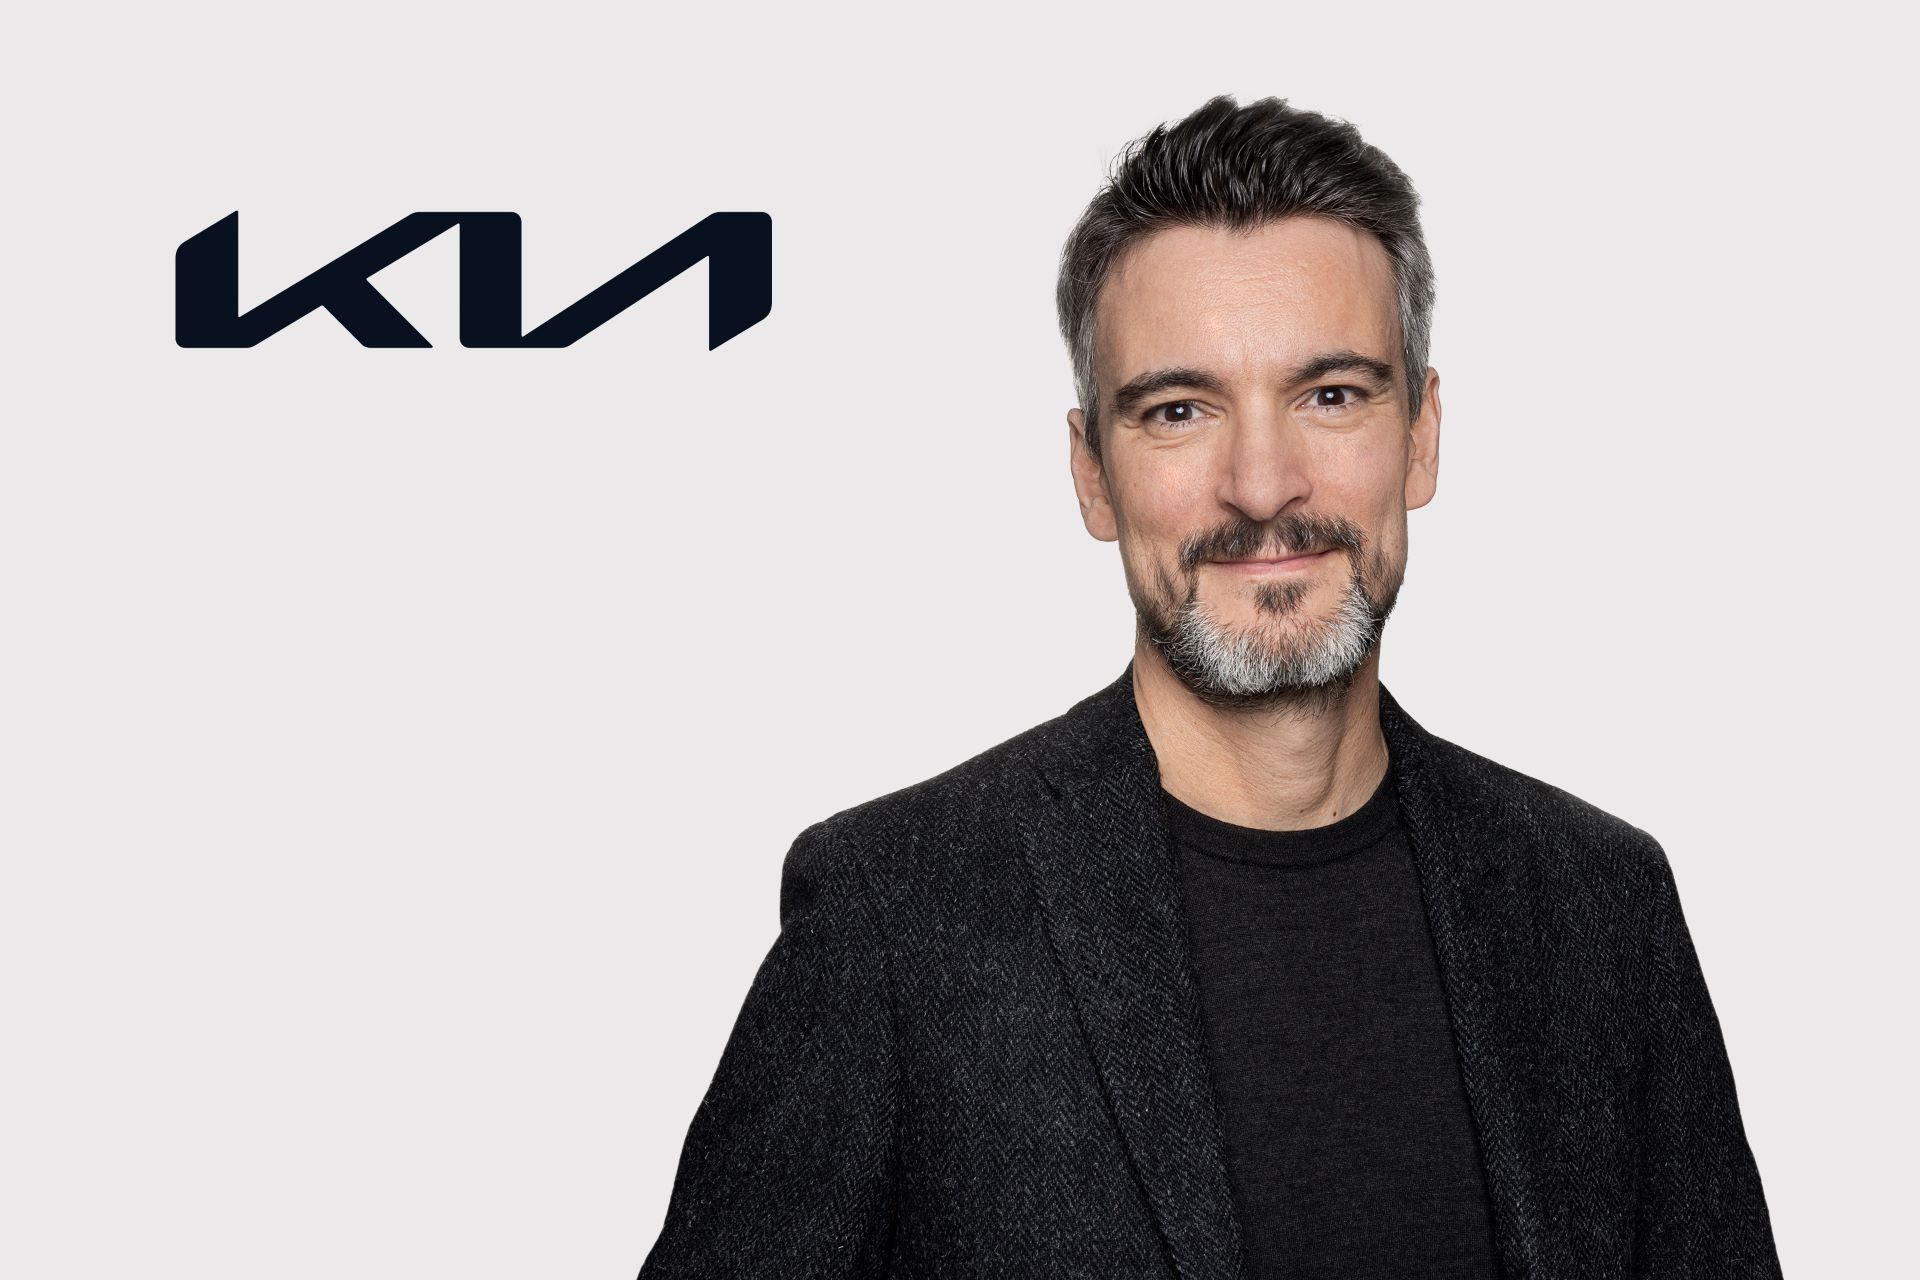 Kia Embarks on New Design Era with Appointment of Visionary Leaders Oliver Samson and Seungmo Lim